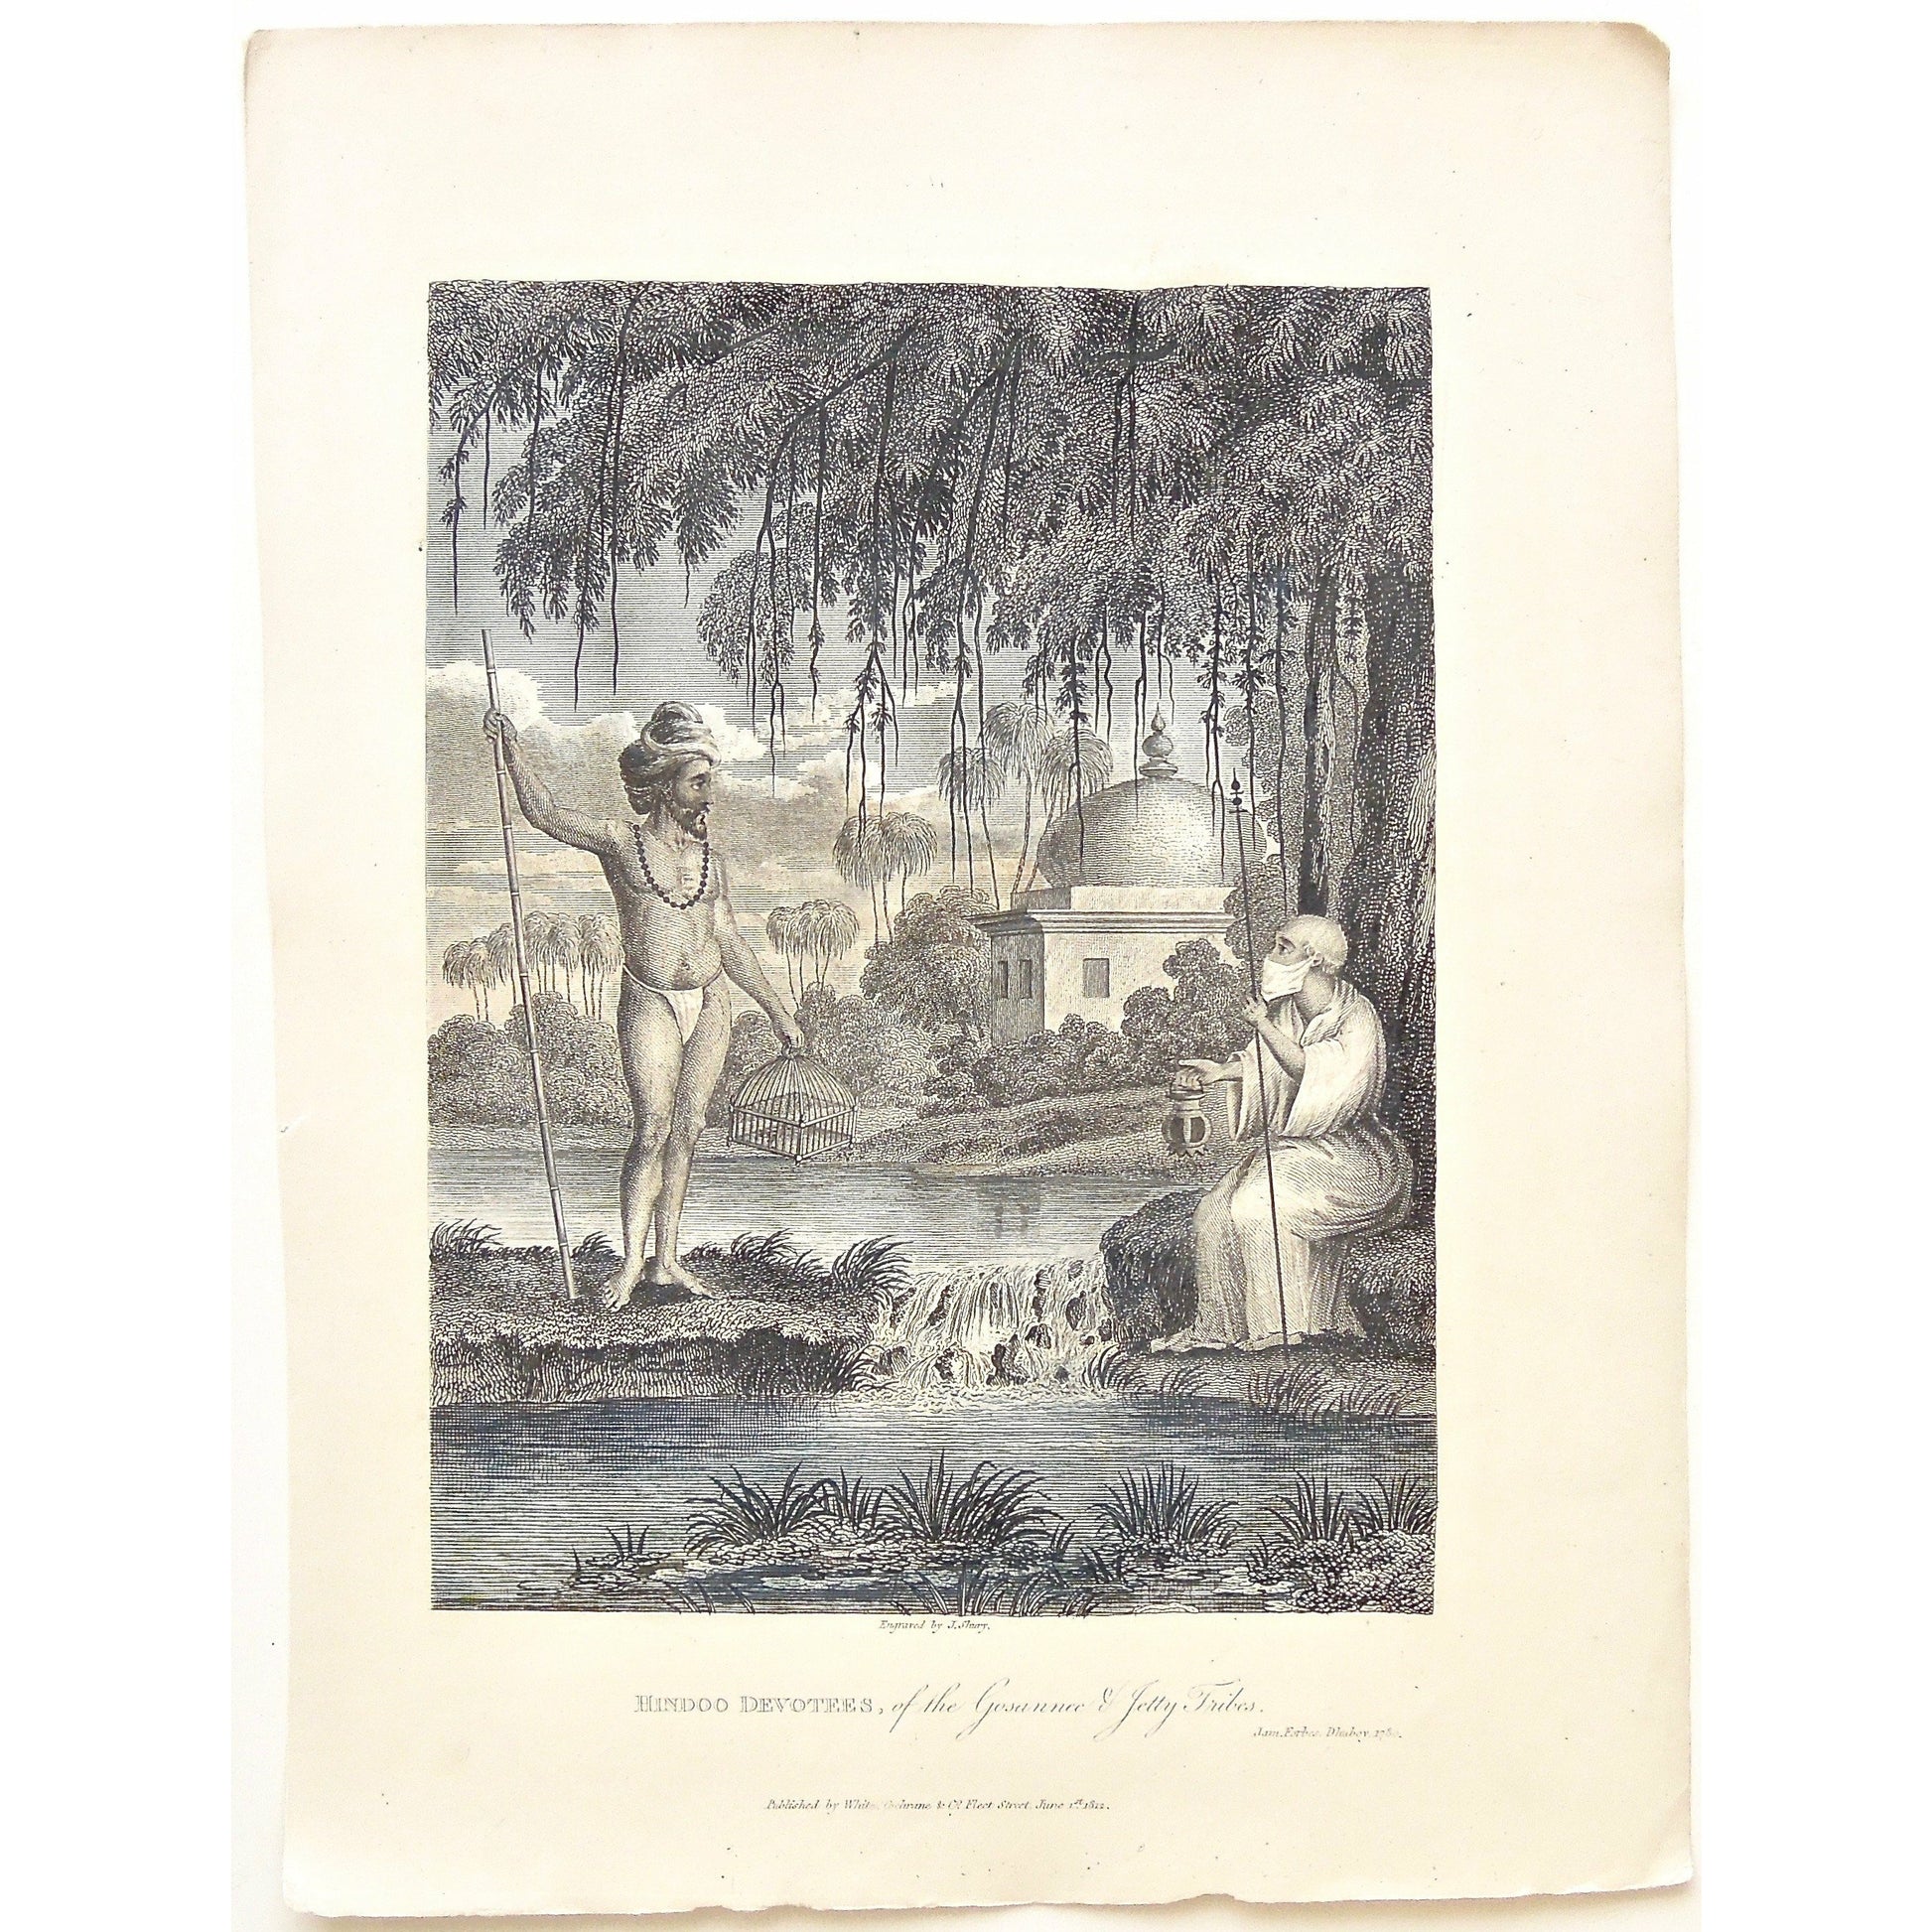 Hindoo, Hindu, Hindoo Devotees, Hindu Devotee, Devotees, Gosannee, Gosannee Tribe, Jetty, Jetty Tribe, Tribe, Native, Natives, Walking stick, bird cage, conversing, temple, India, Indian, scenery, James Forbes, Forbes, Oriental Memoirs, Oriental, Memoirs, Seventeen Years Residence in India, White, Cochrane & Co., Horace’s Head, Fleet Street, London, 1813, 1812, 1780, Shury, Bensley, Bolt Court, Antique Print, Antique, Prints, Vintage Prints, Vintage, Collector, Collectable, Original, Unique, Rare Map, Rare,